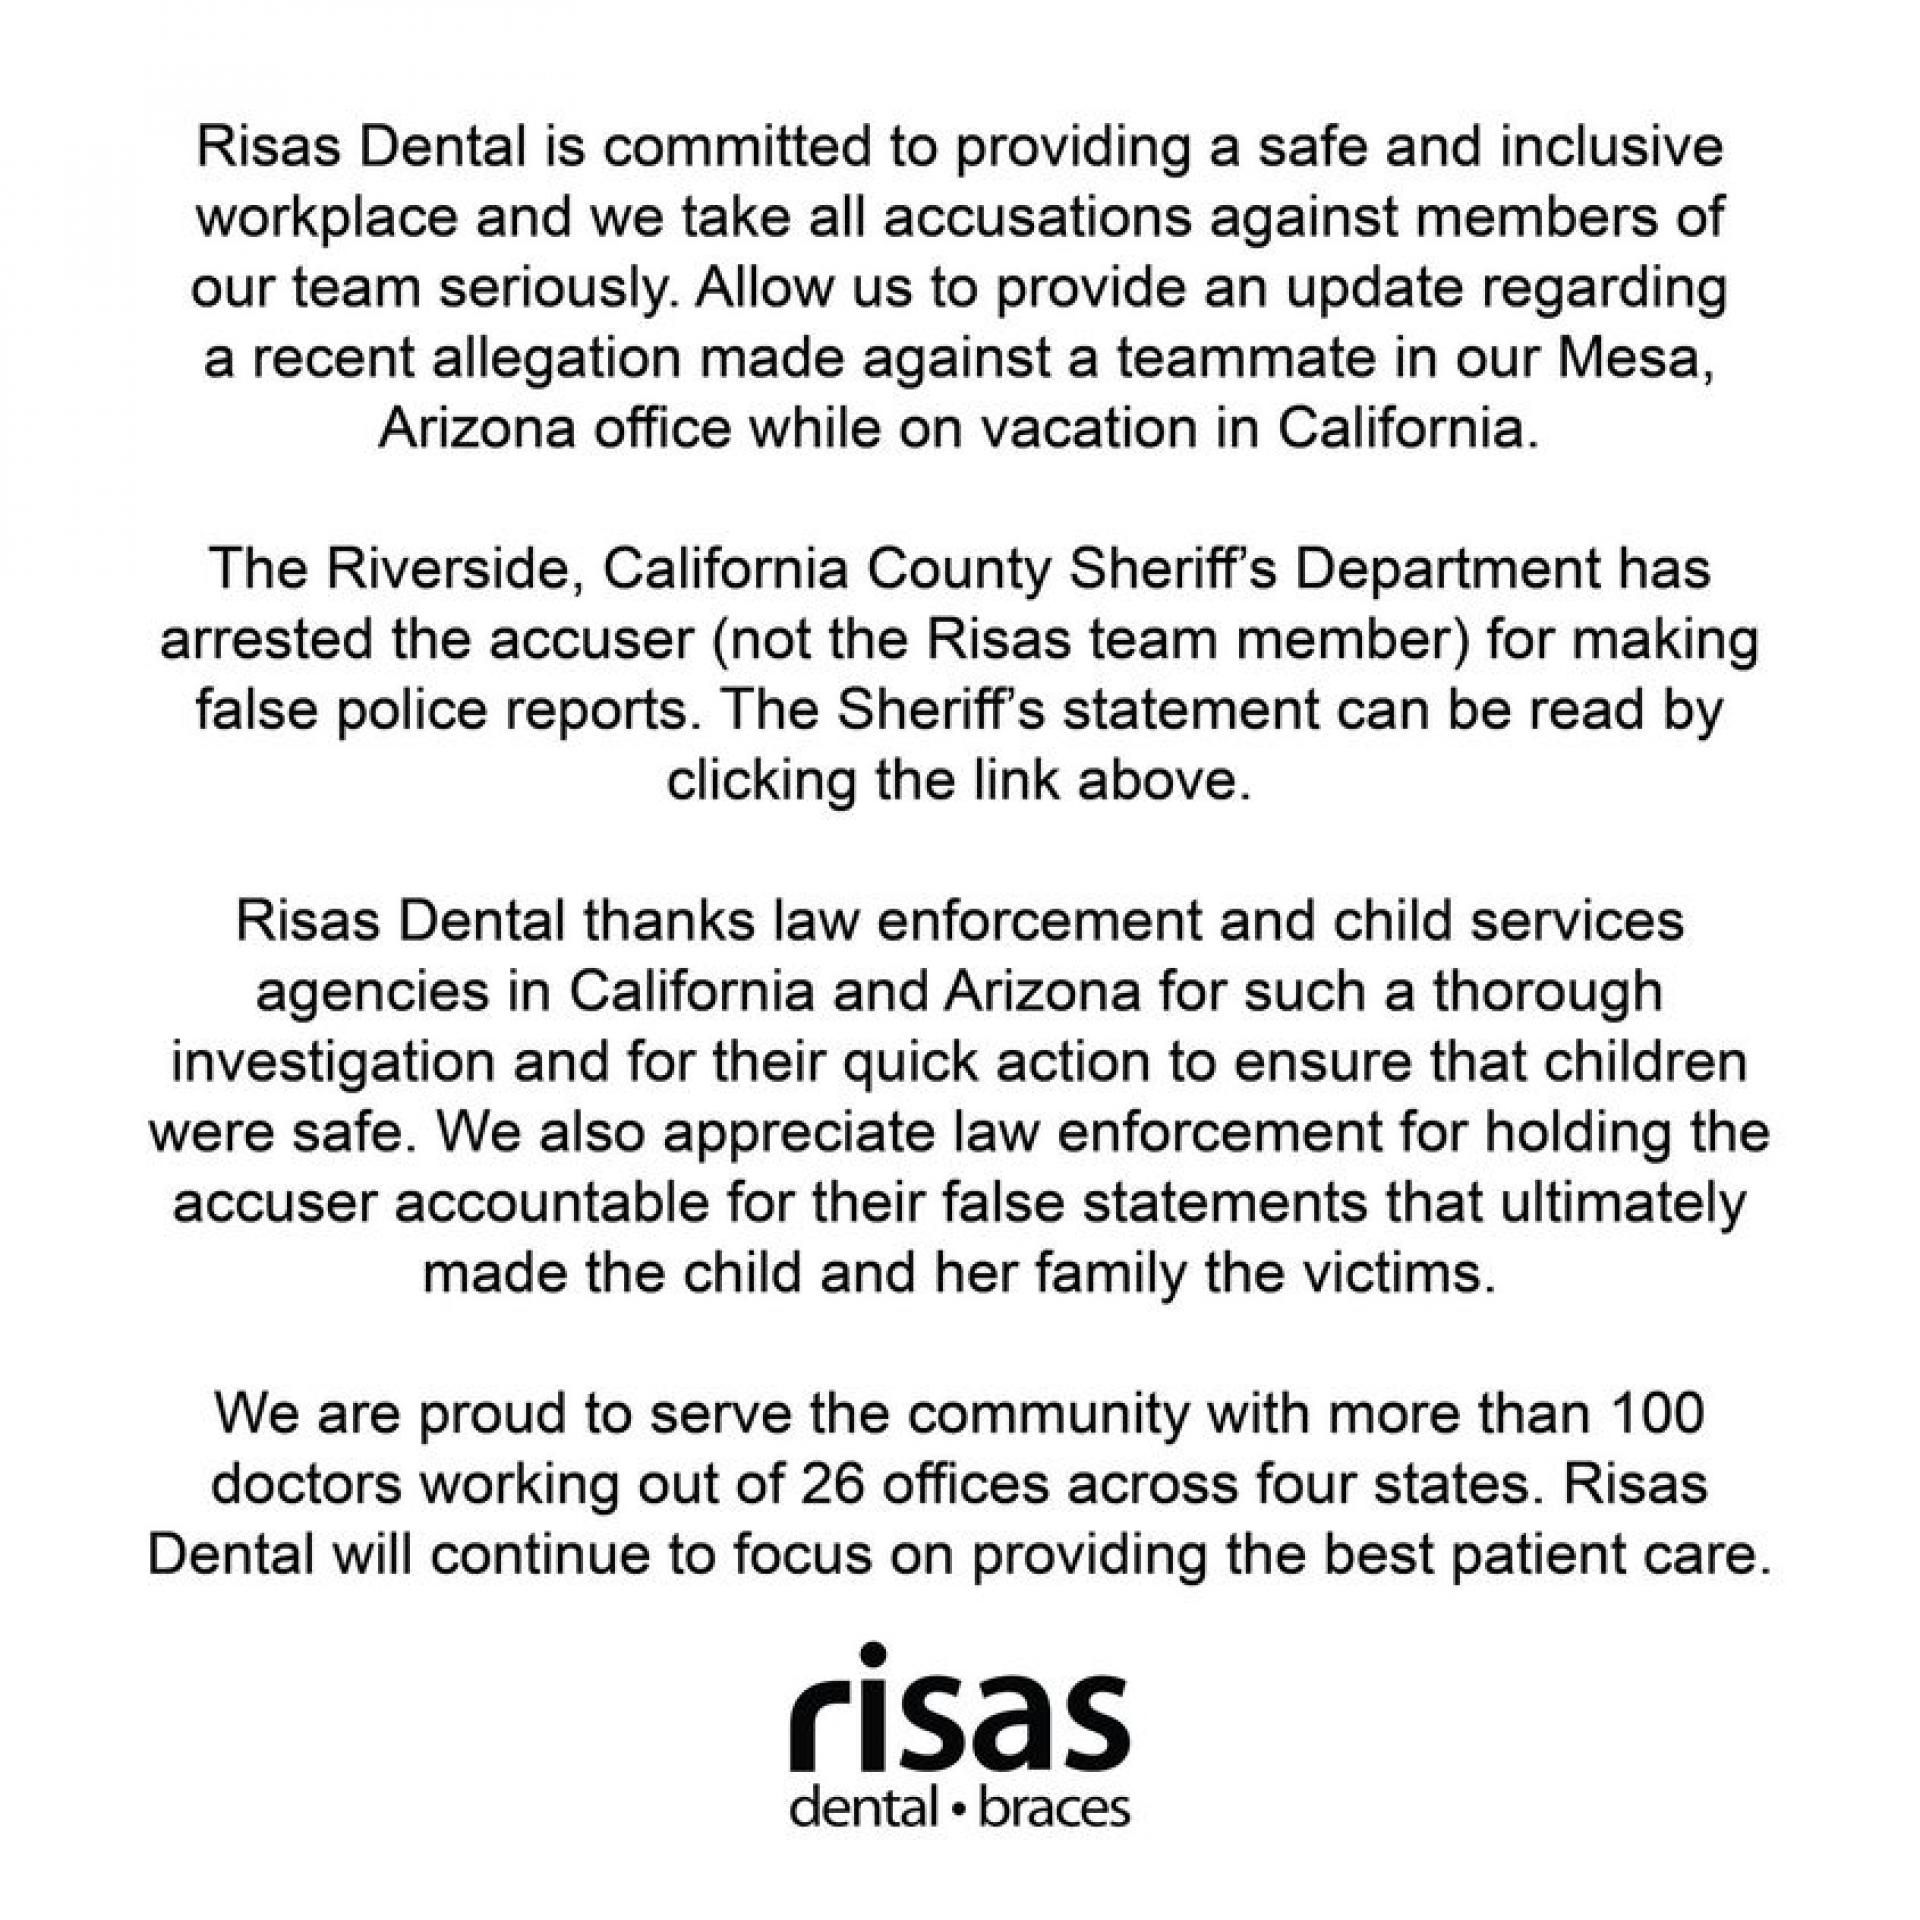 Navigating a Crisis and Preserving the Reputation of Risas Dental